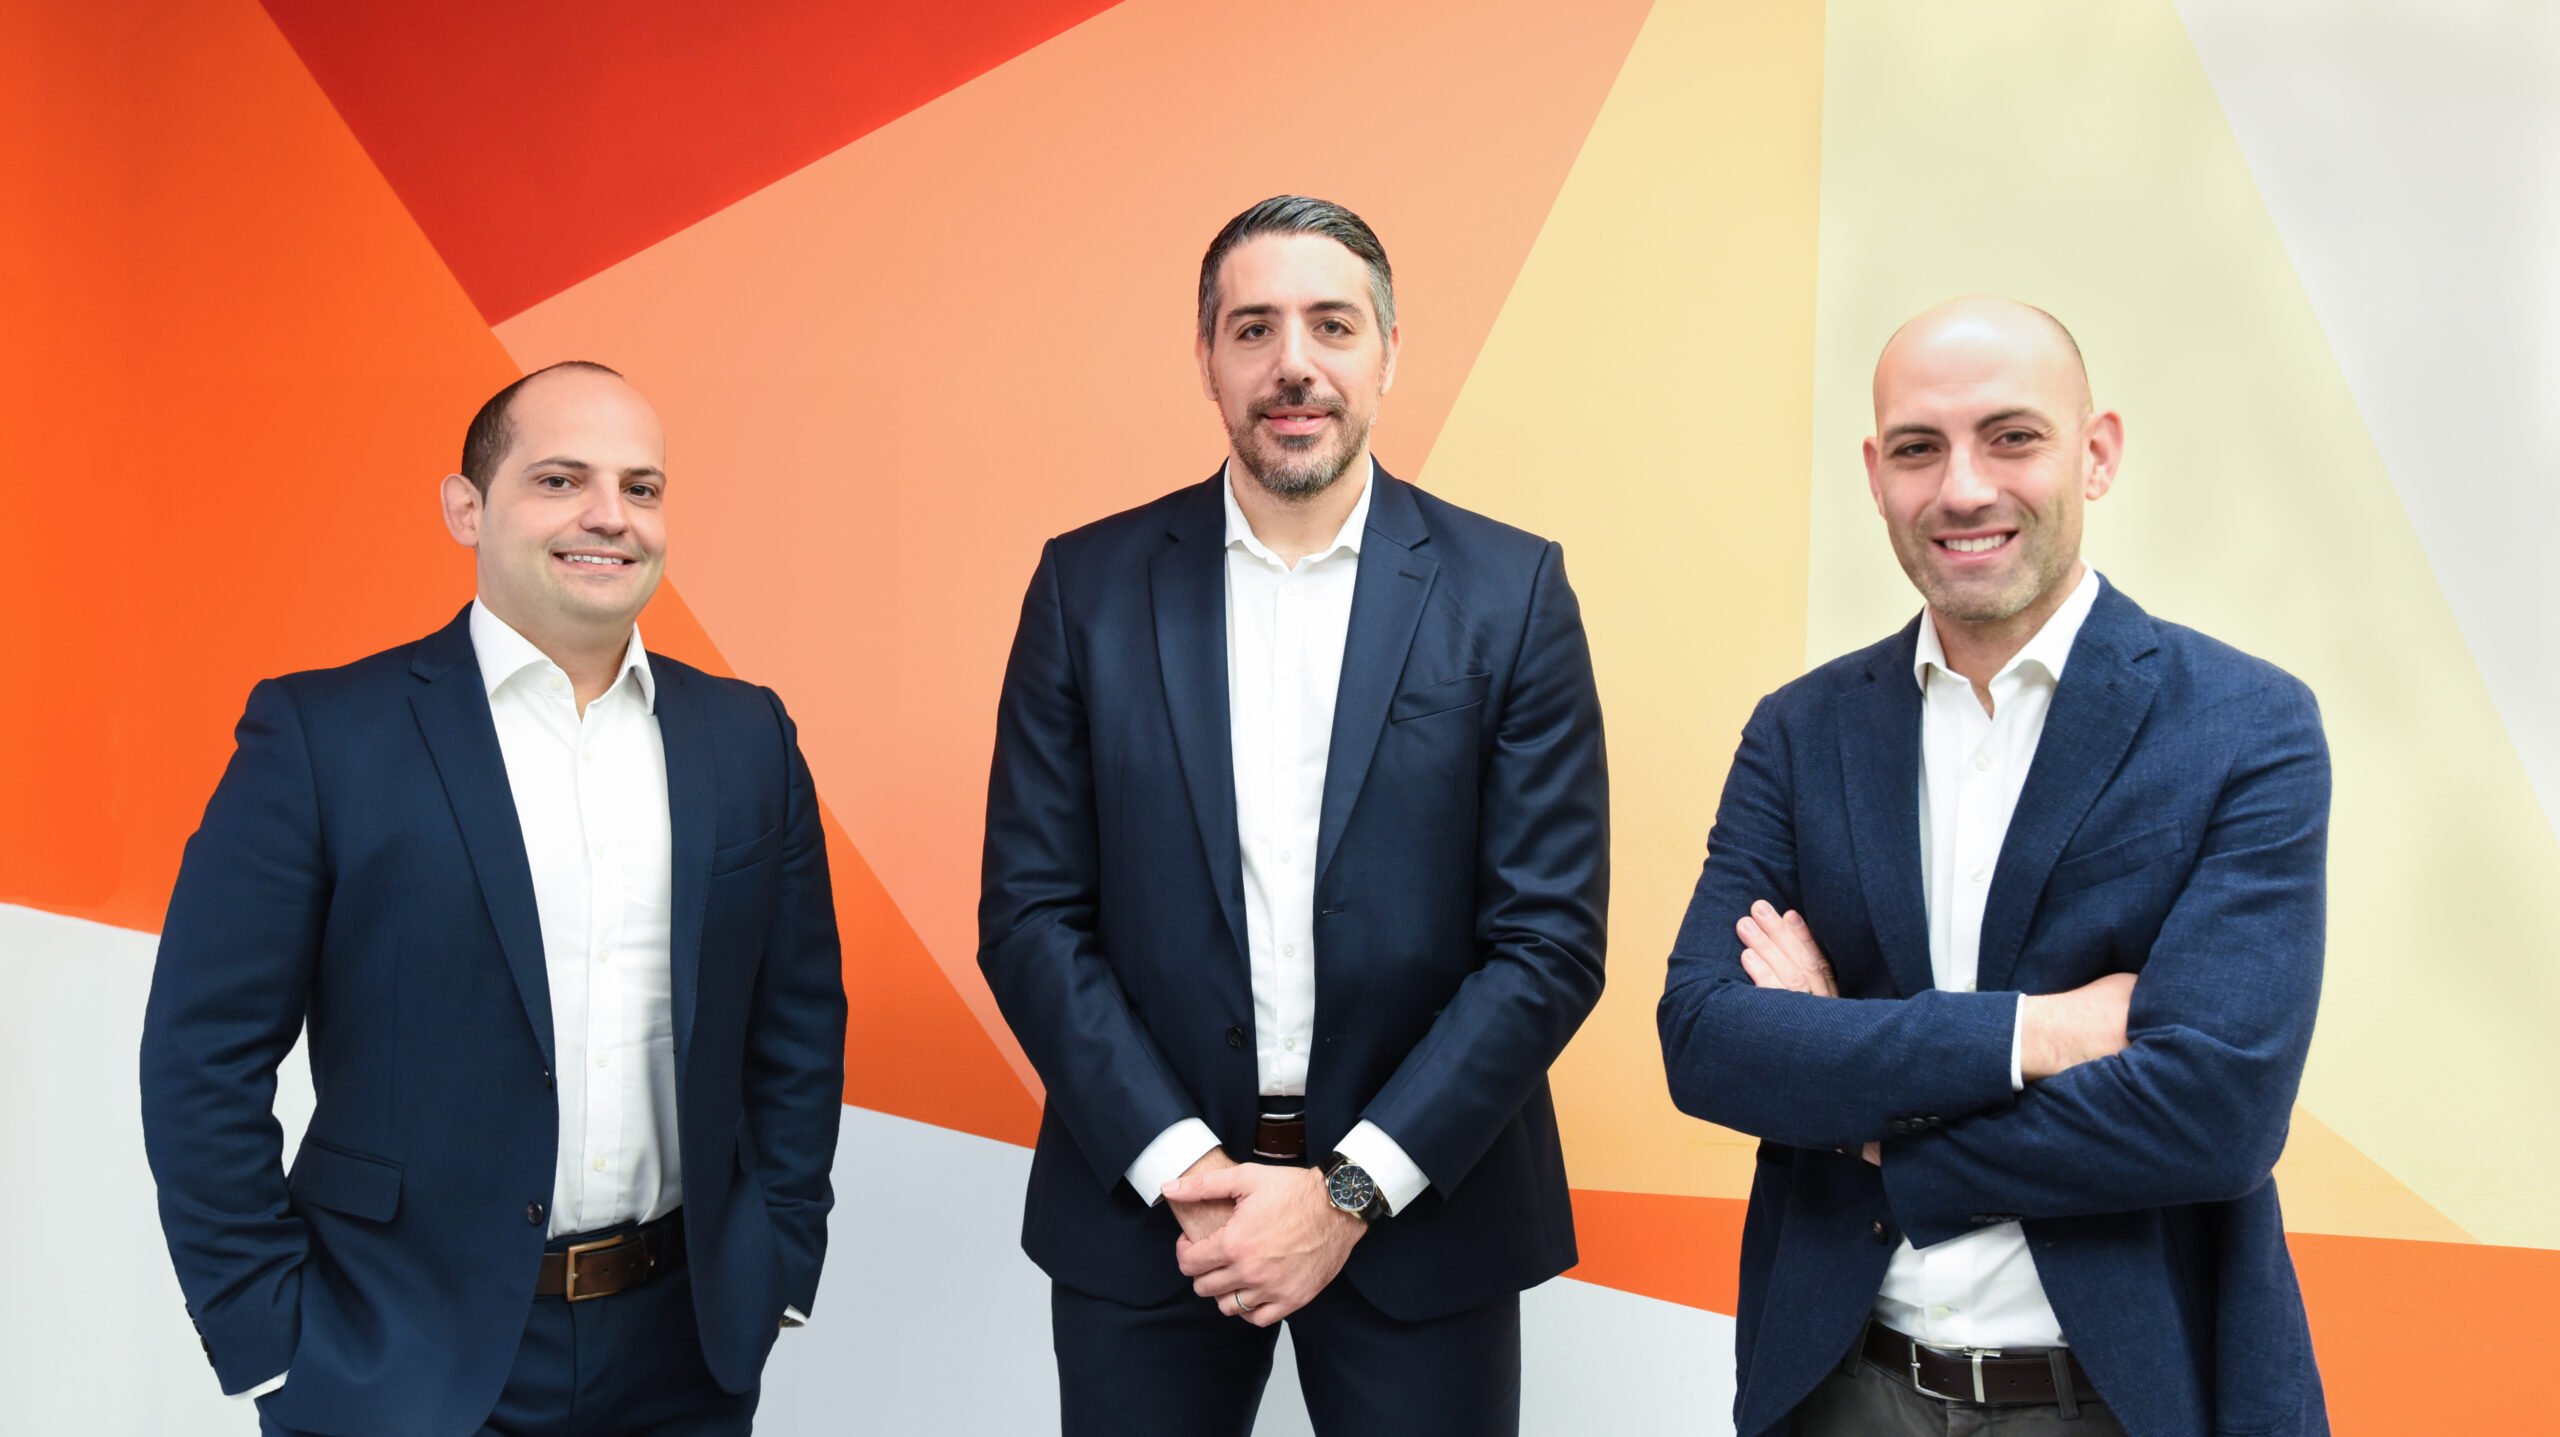 PwC Malta announces the appointment of 3 new Partners